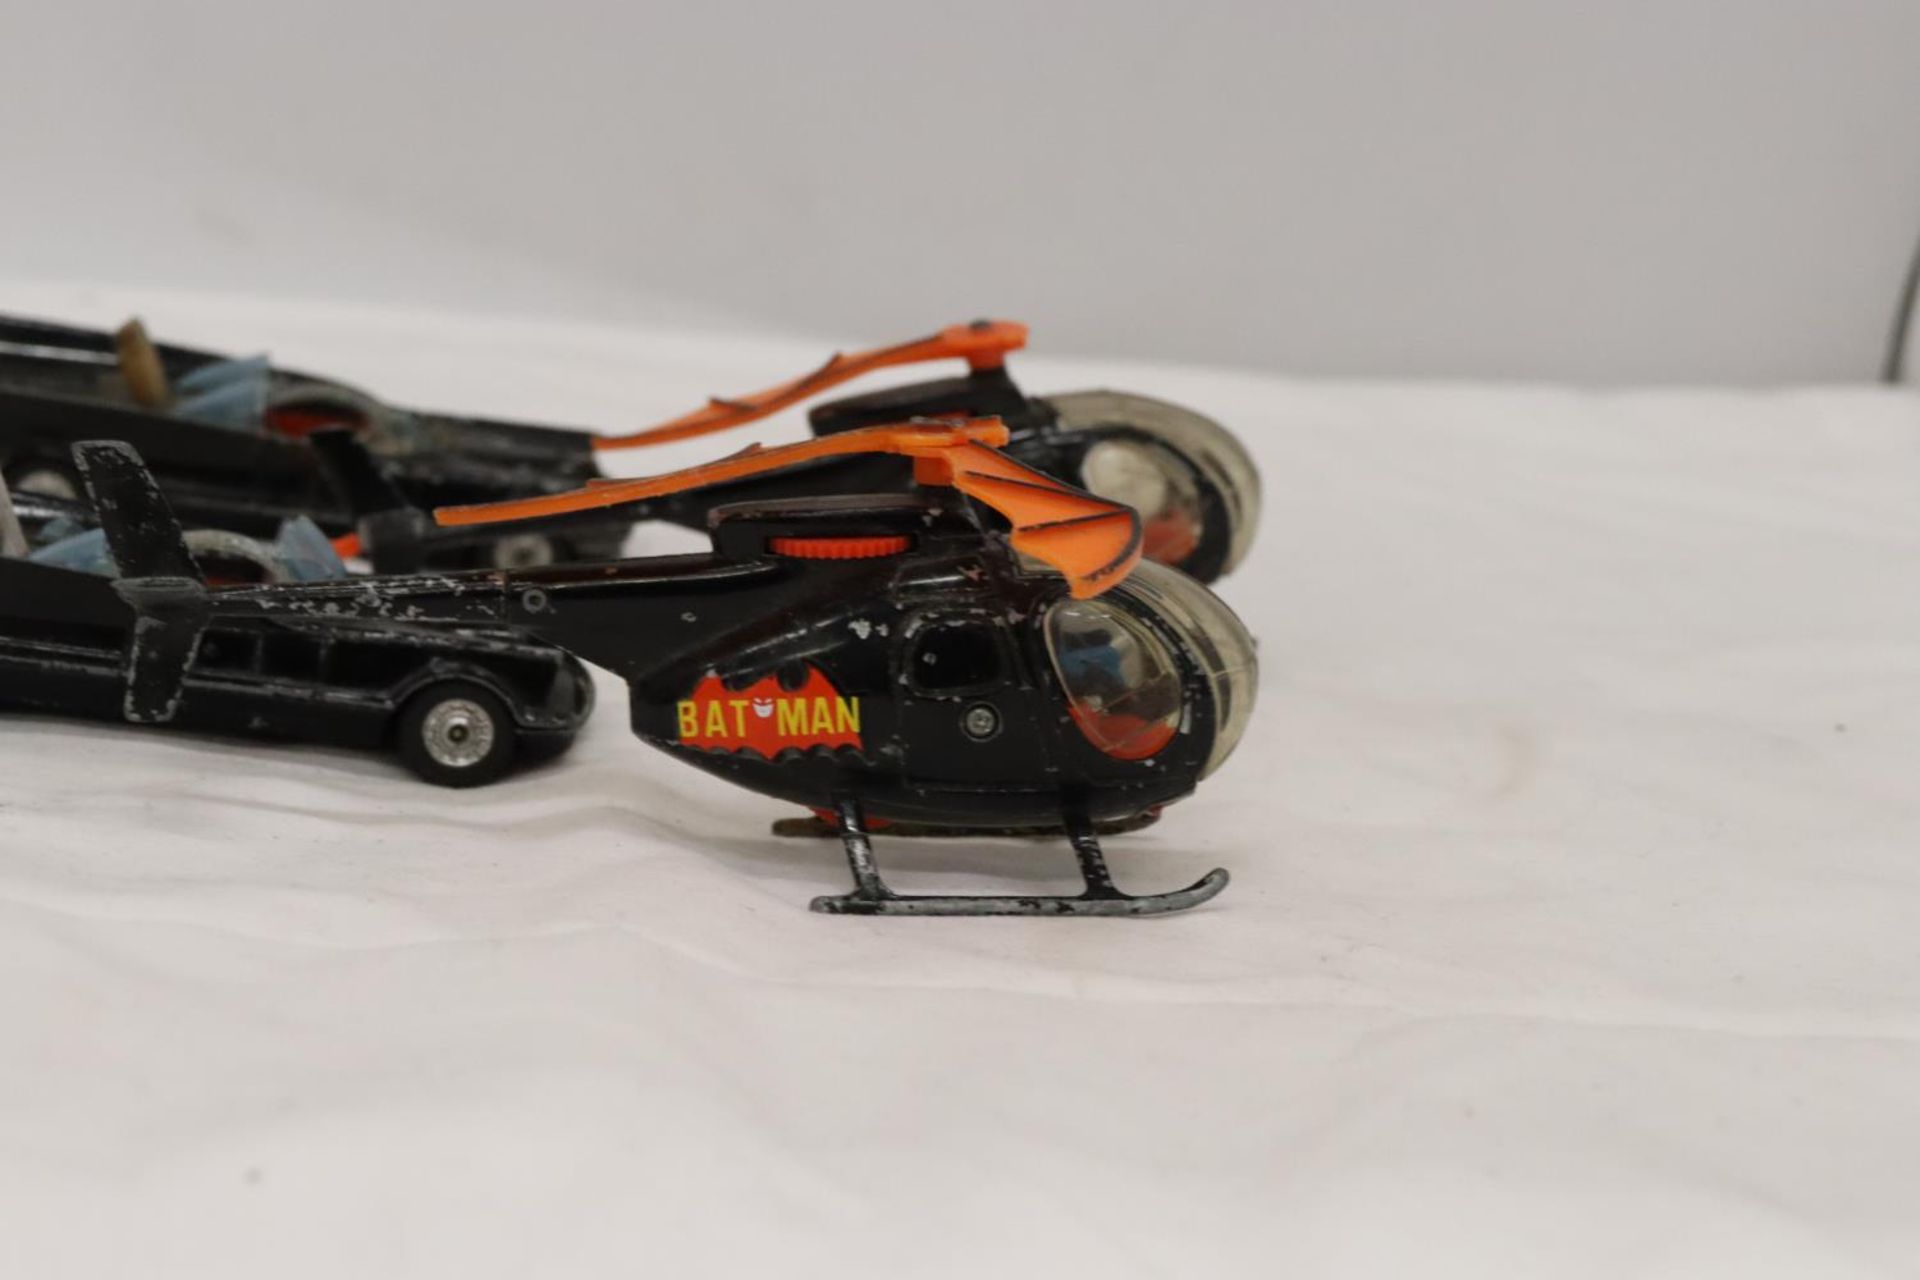 TWO CORGI BATMOBILES TOGETHER WITH TWO BATCOPTERS - Image 5 of 8